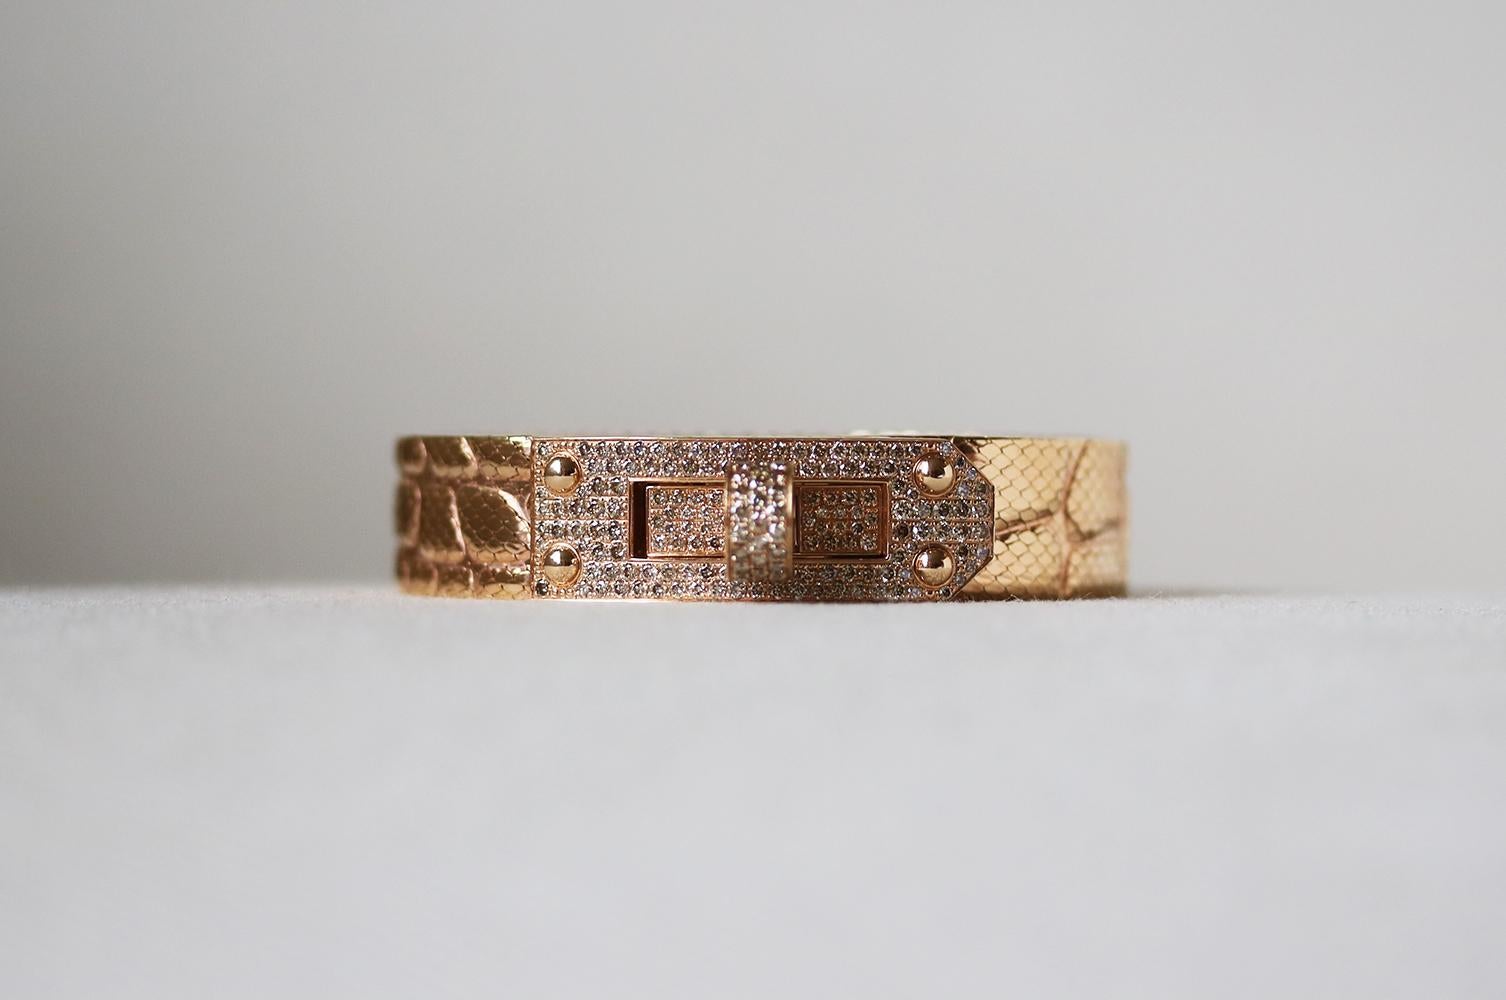 Hermès Kelly rose gold and diamond bracelet. A beautiful timeless piece is part of the iconic Kelly collection. Comprised of 18k Rose Gold. 1.86 Carats of pavé diamonds set on the bracelet's fastening. Milanese mesh alligator-style pattern strap.